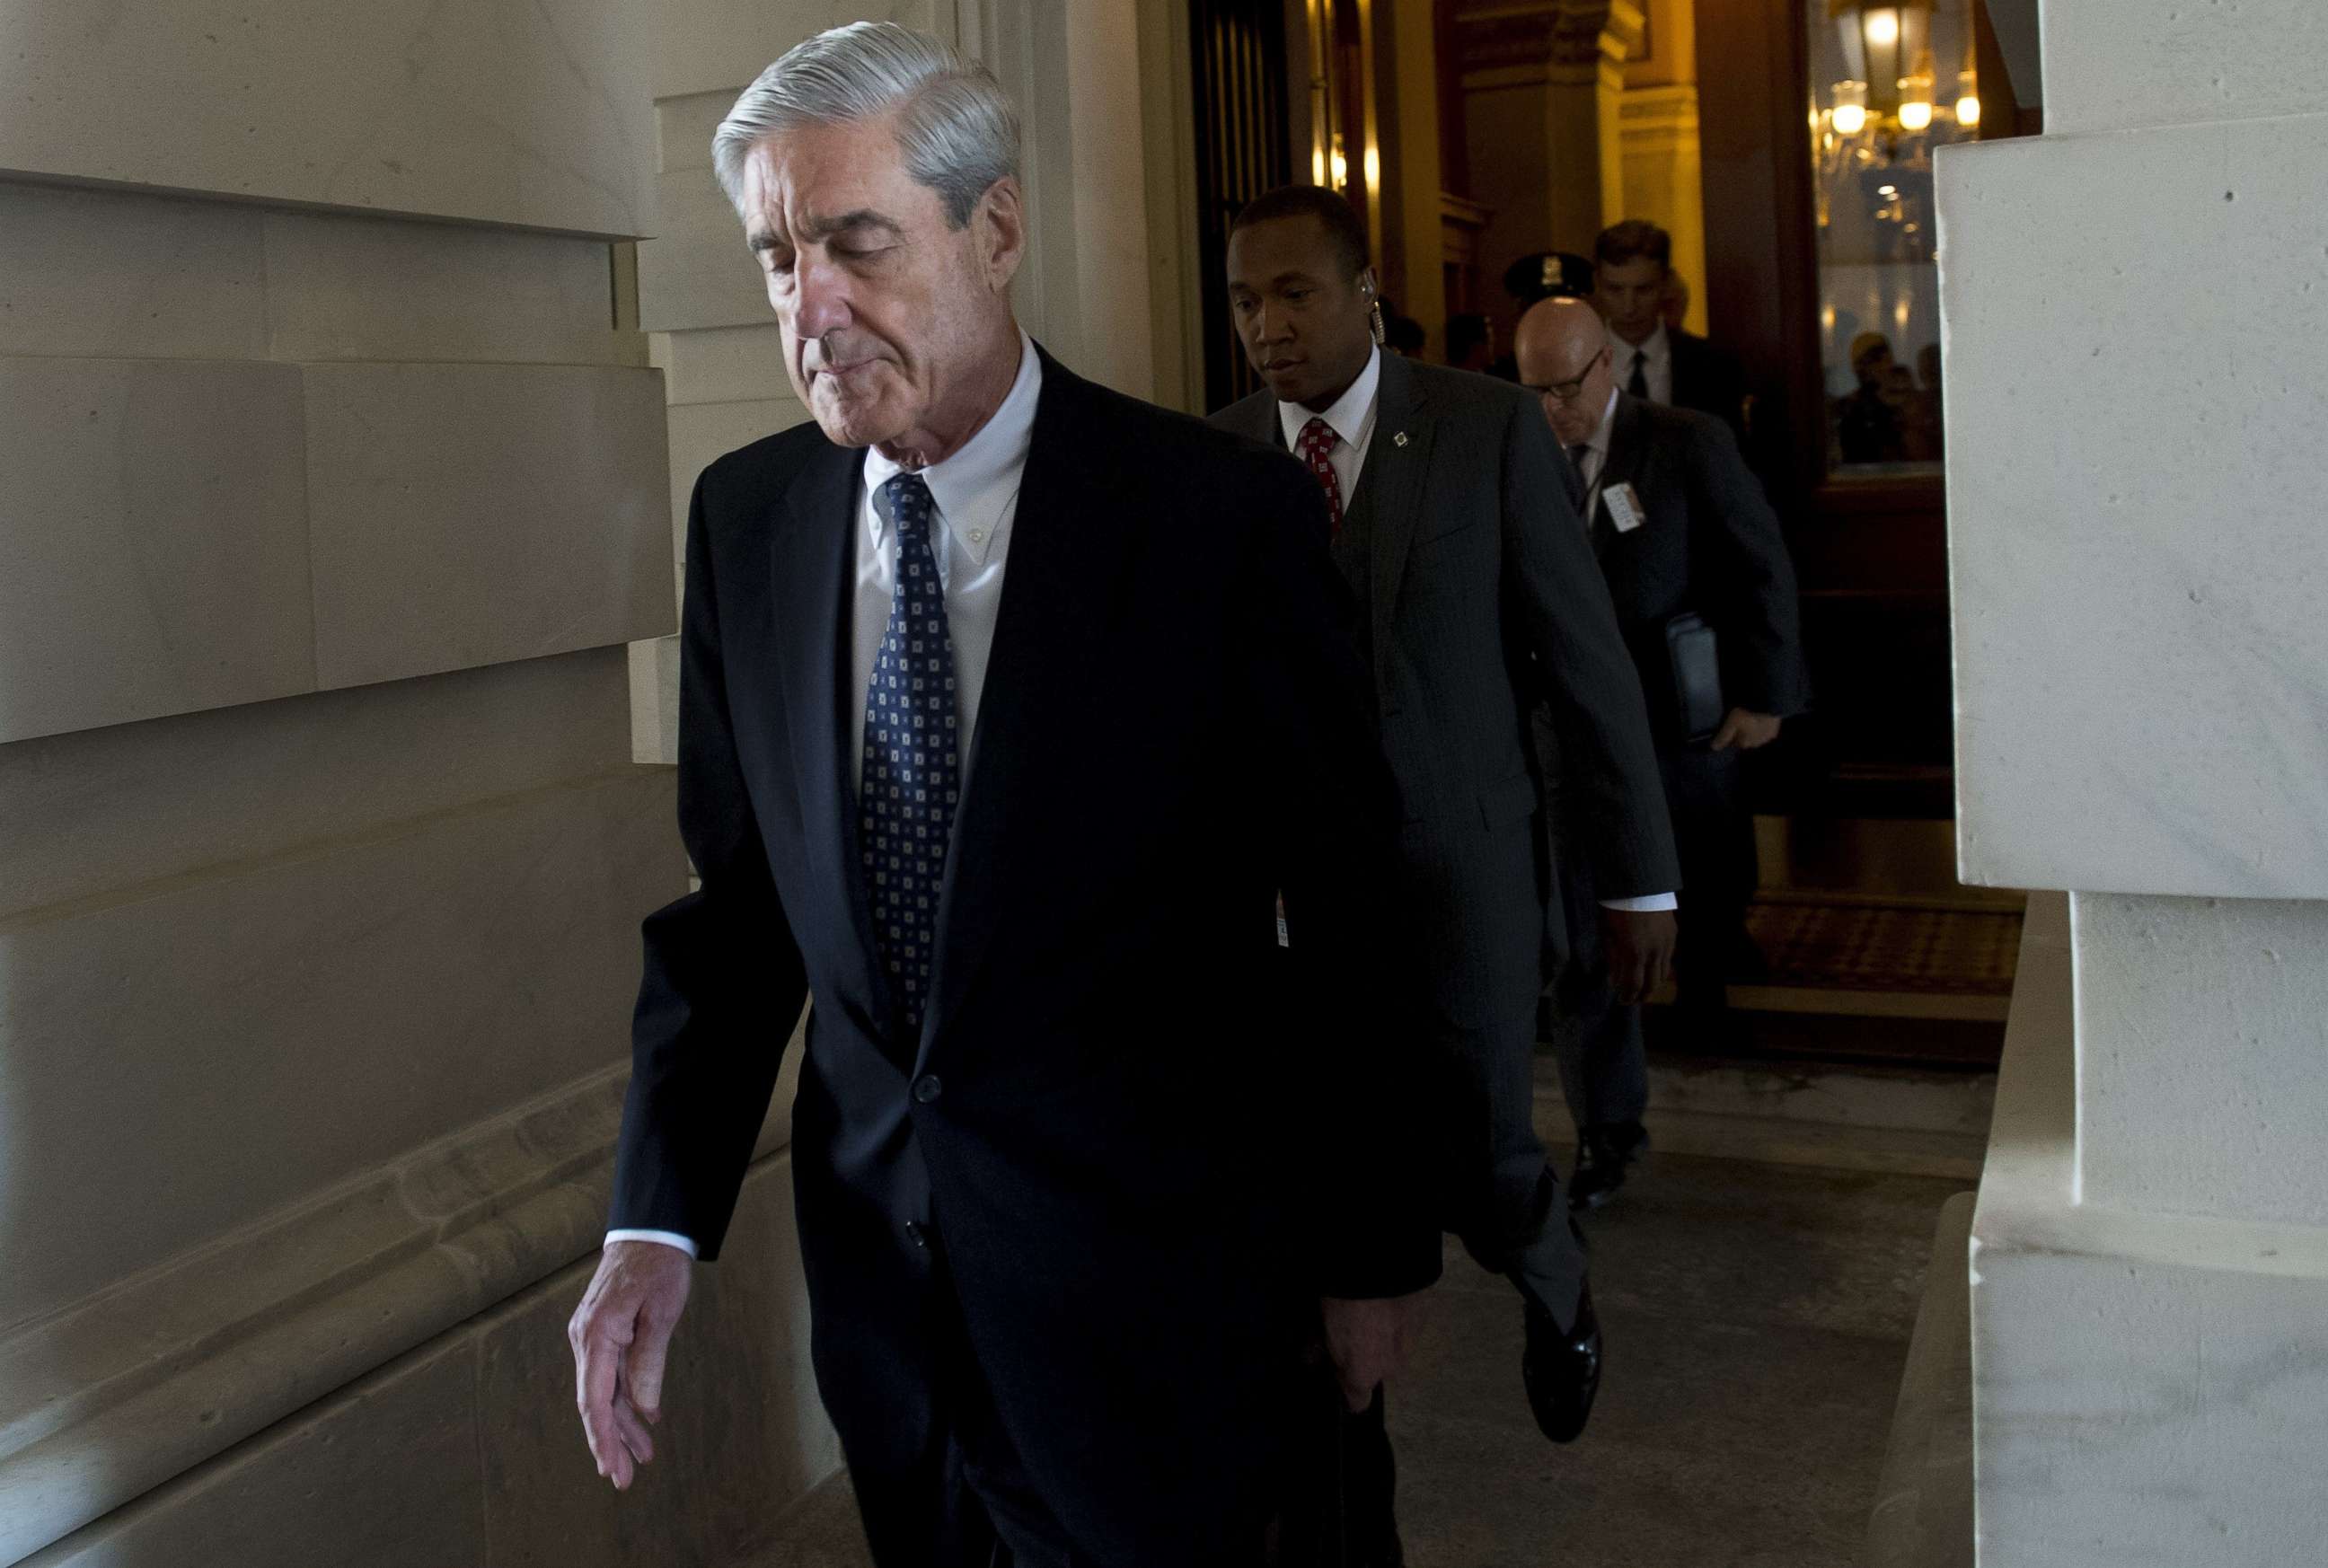 PHOTO: In this file photo taken on June 21, 2017, former FBI Director Robert Mueller, special counsel on the Russian investigation, leaves following a meeting with members of the US Senate Judiciary Committee at the US Capitol in Washington.